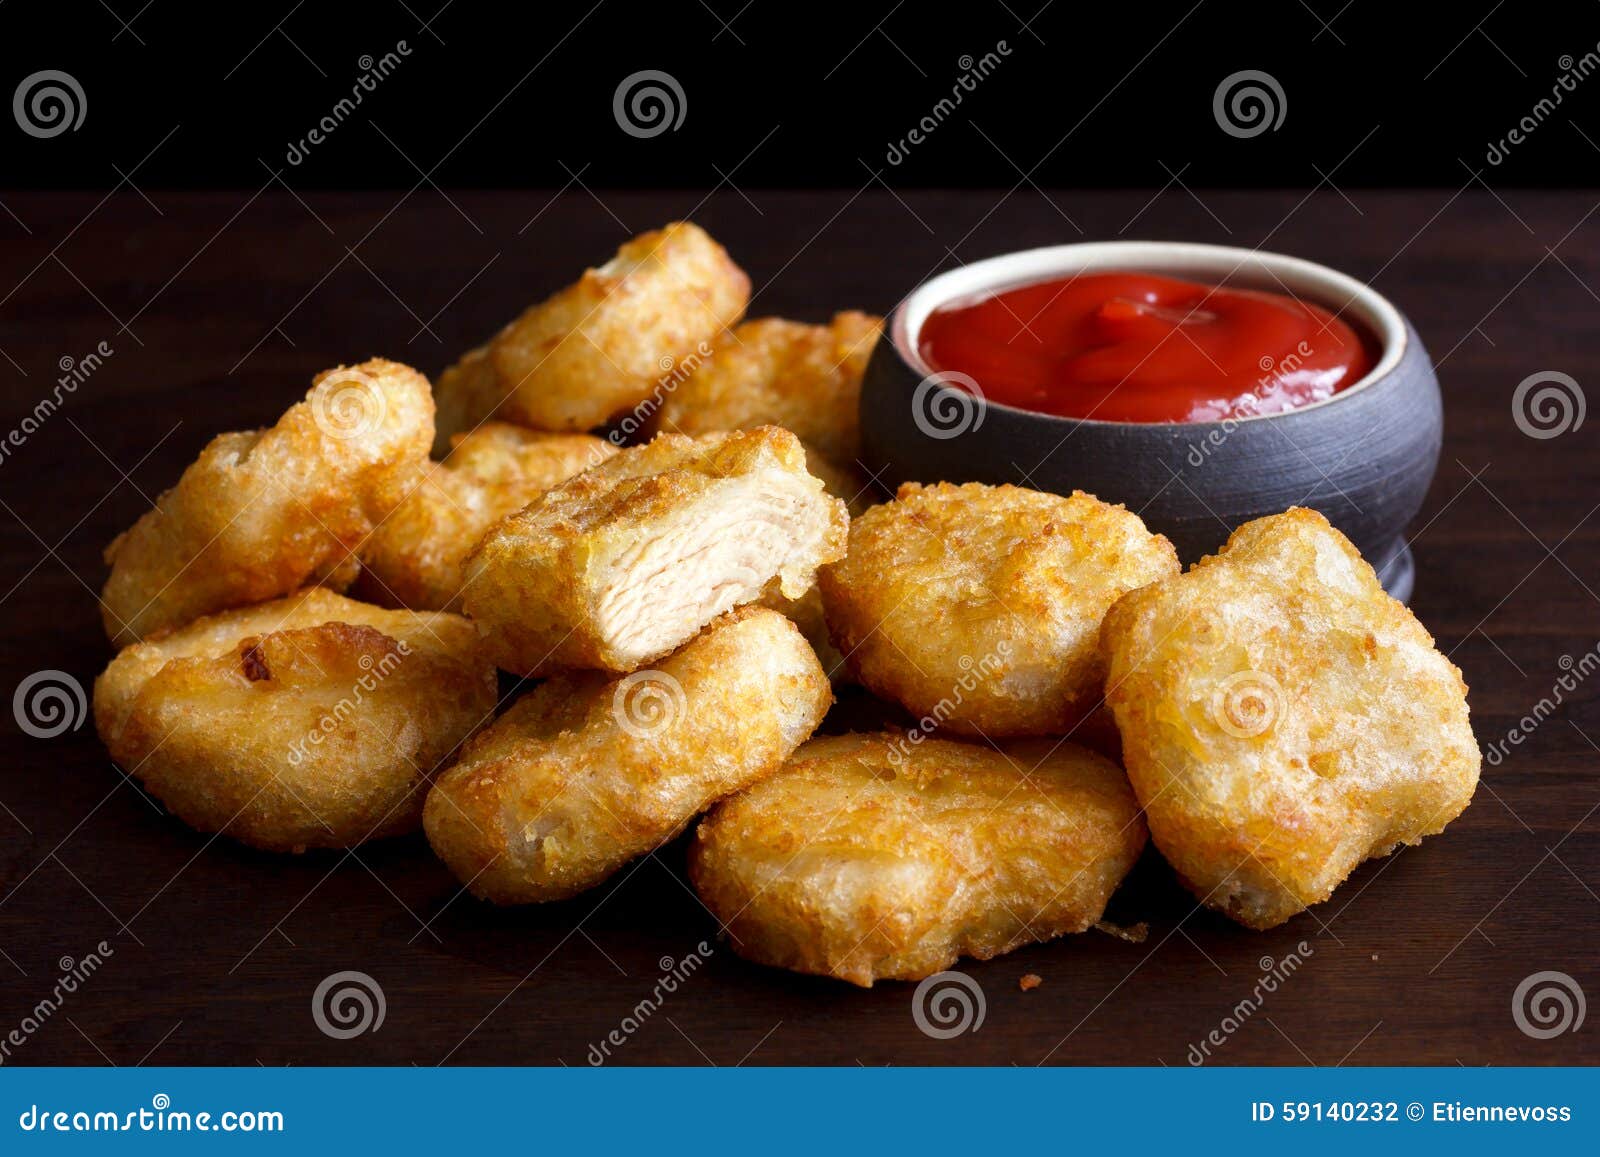 pile of golden deep-fried battered chicken nuggets with empty ru